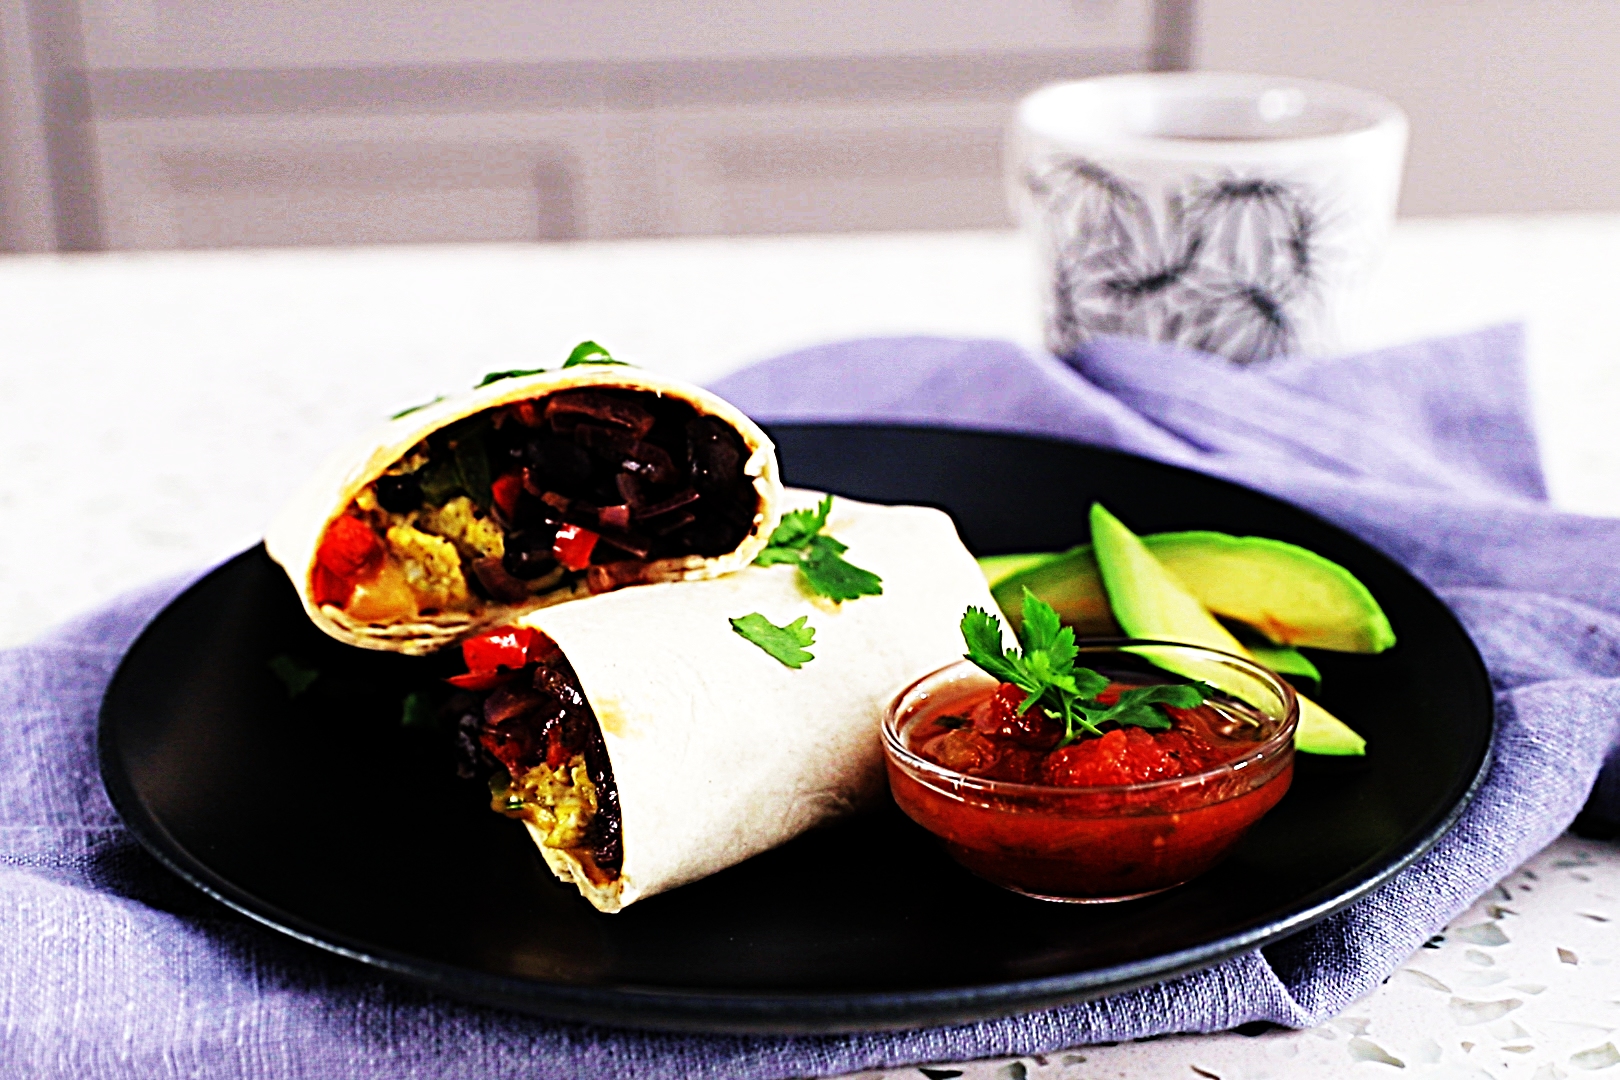 Stupid-Easy Recipe for Sheet Pan Black Bean and Vegetable Breakfast Burritos (#1 Top-Rated)